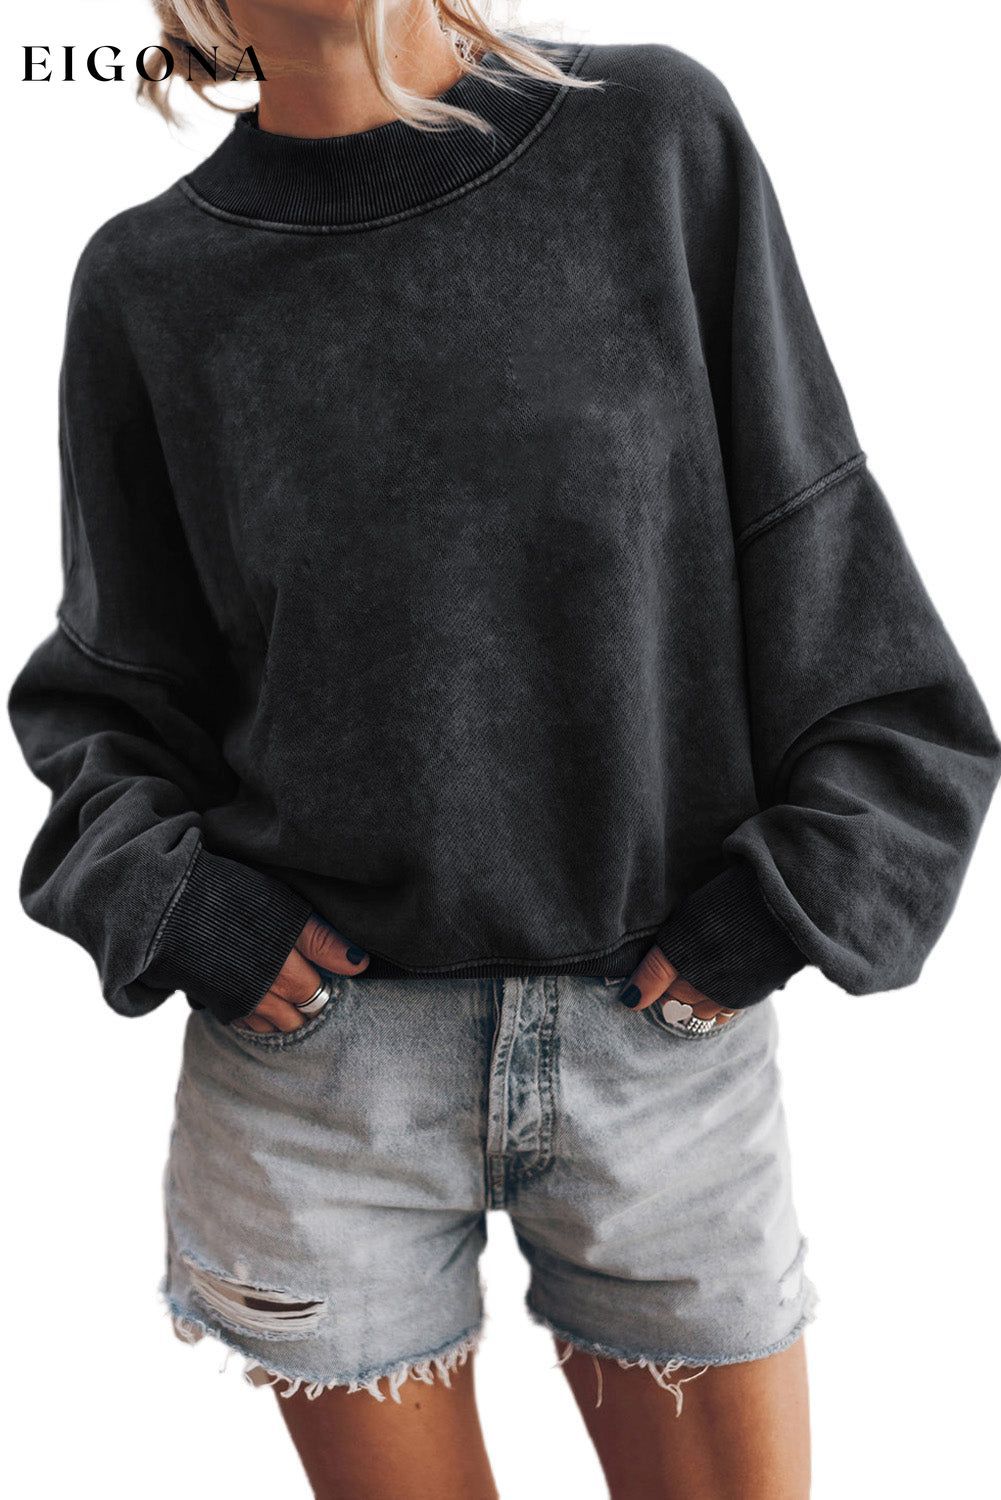 Black Drop Shoulder Crew Neck Pullover Sweatshirt All In Stock Best Sellers clothes Craft Washed EDM Monthly Recomend Hot picks Occasion Daily Print Solid Color Season Winter Style Casual Sweater sweaters Sweatshirt